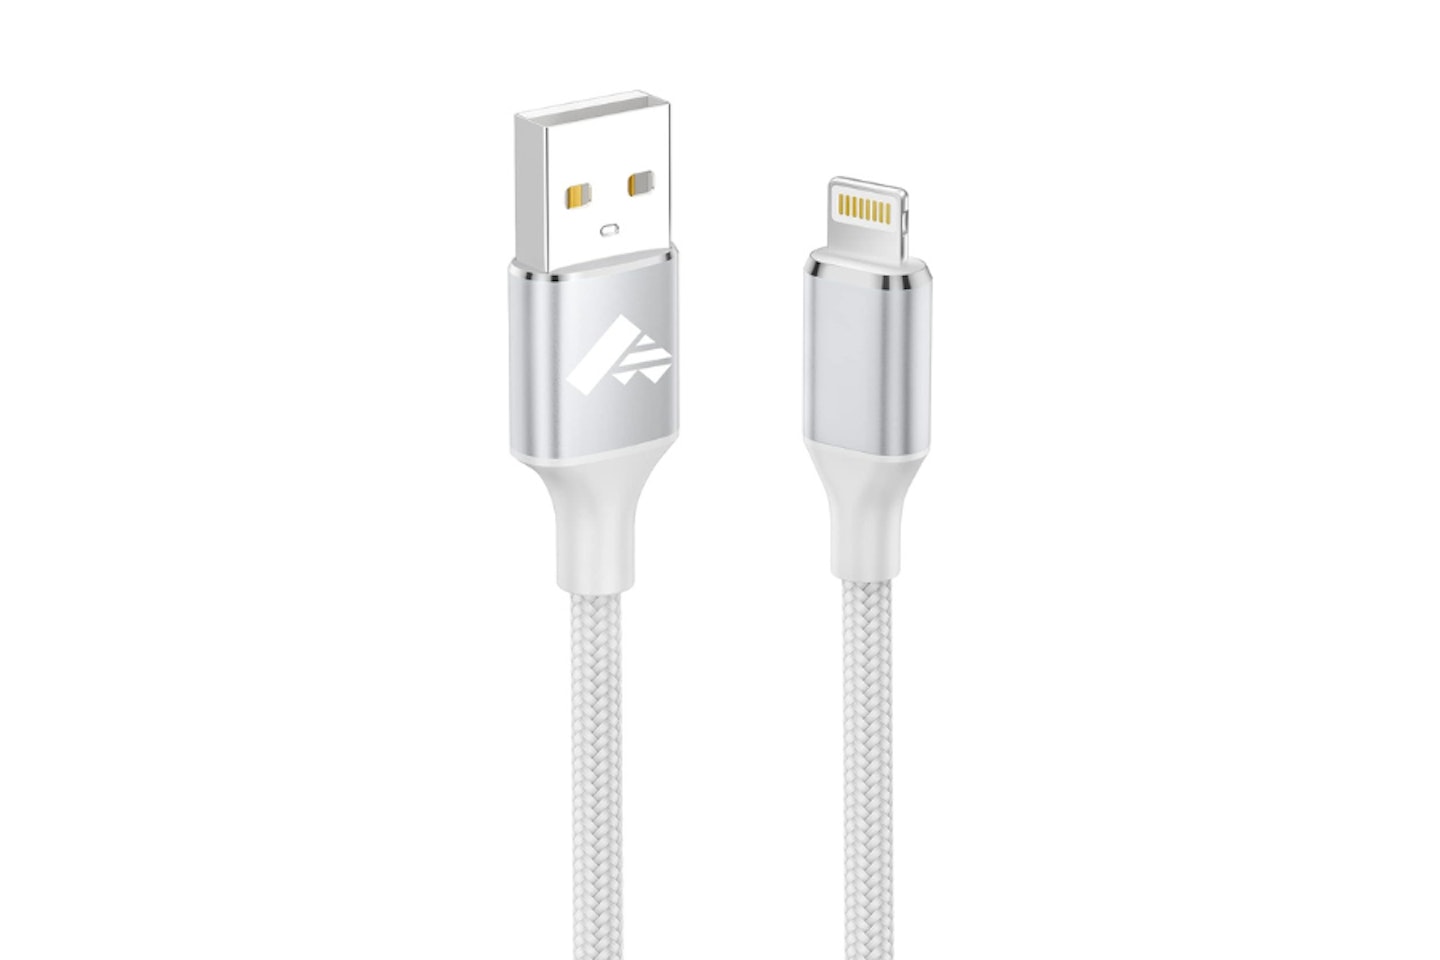 Aioneus iPhone Charger Cable